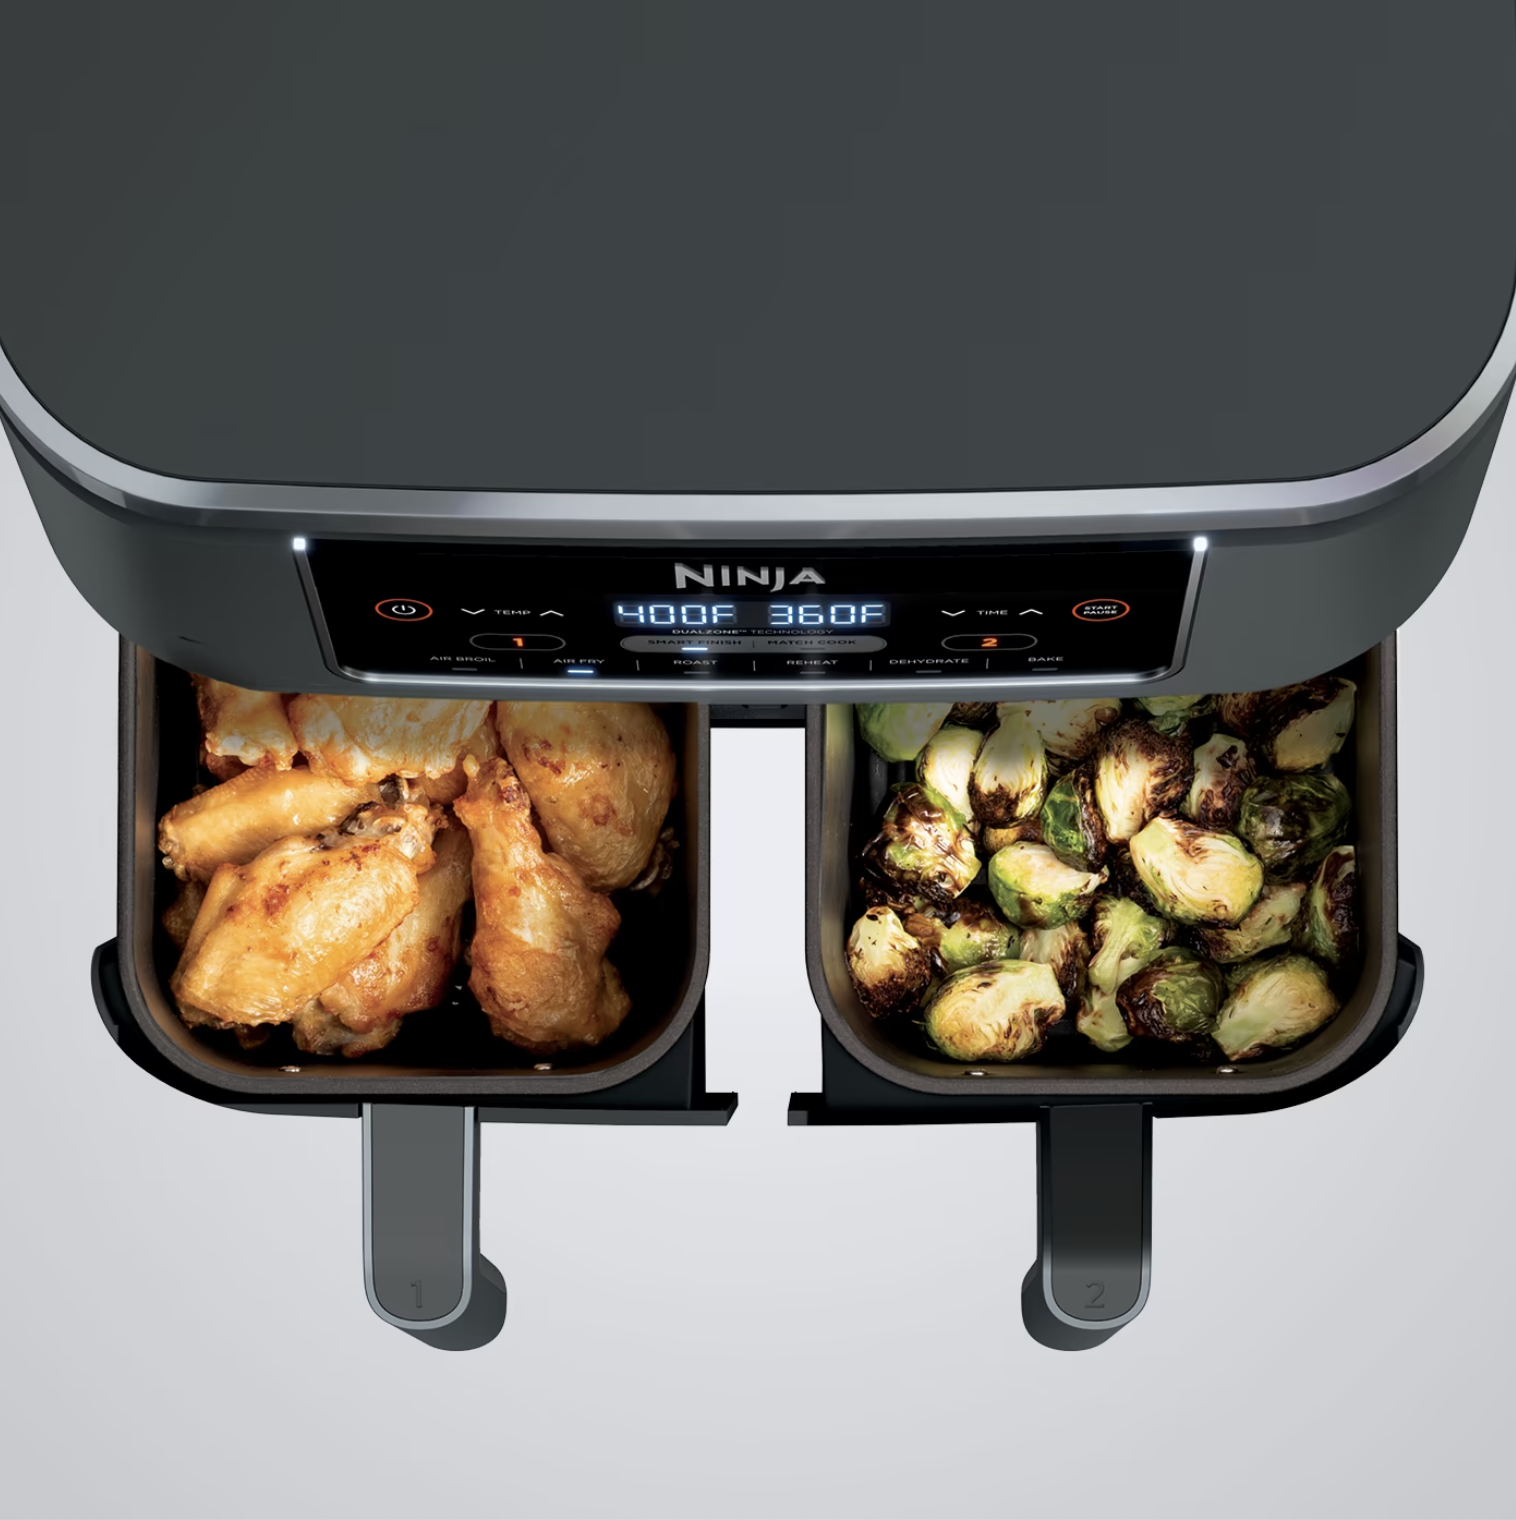 The air fryer baskets filled with brussels sprouts and chicken fingers